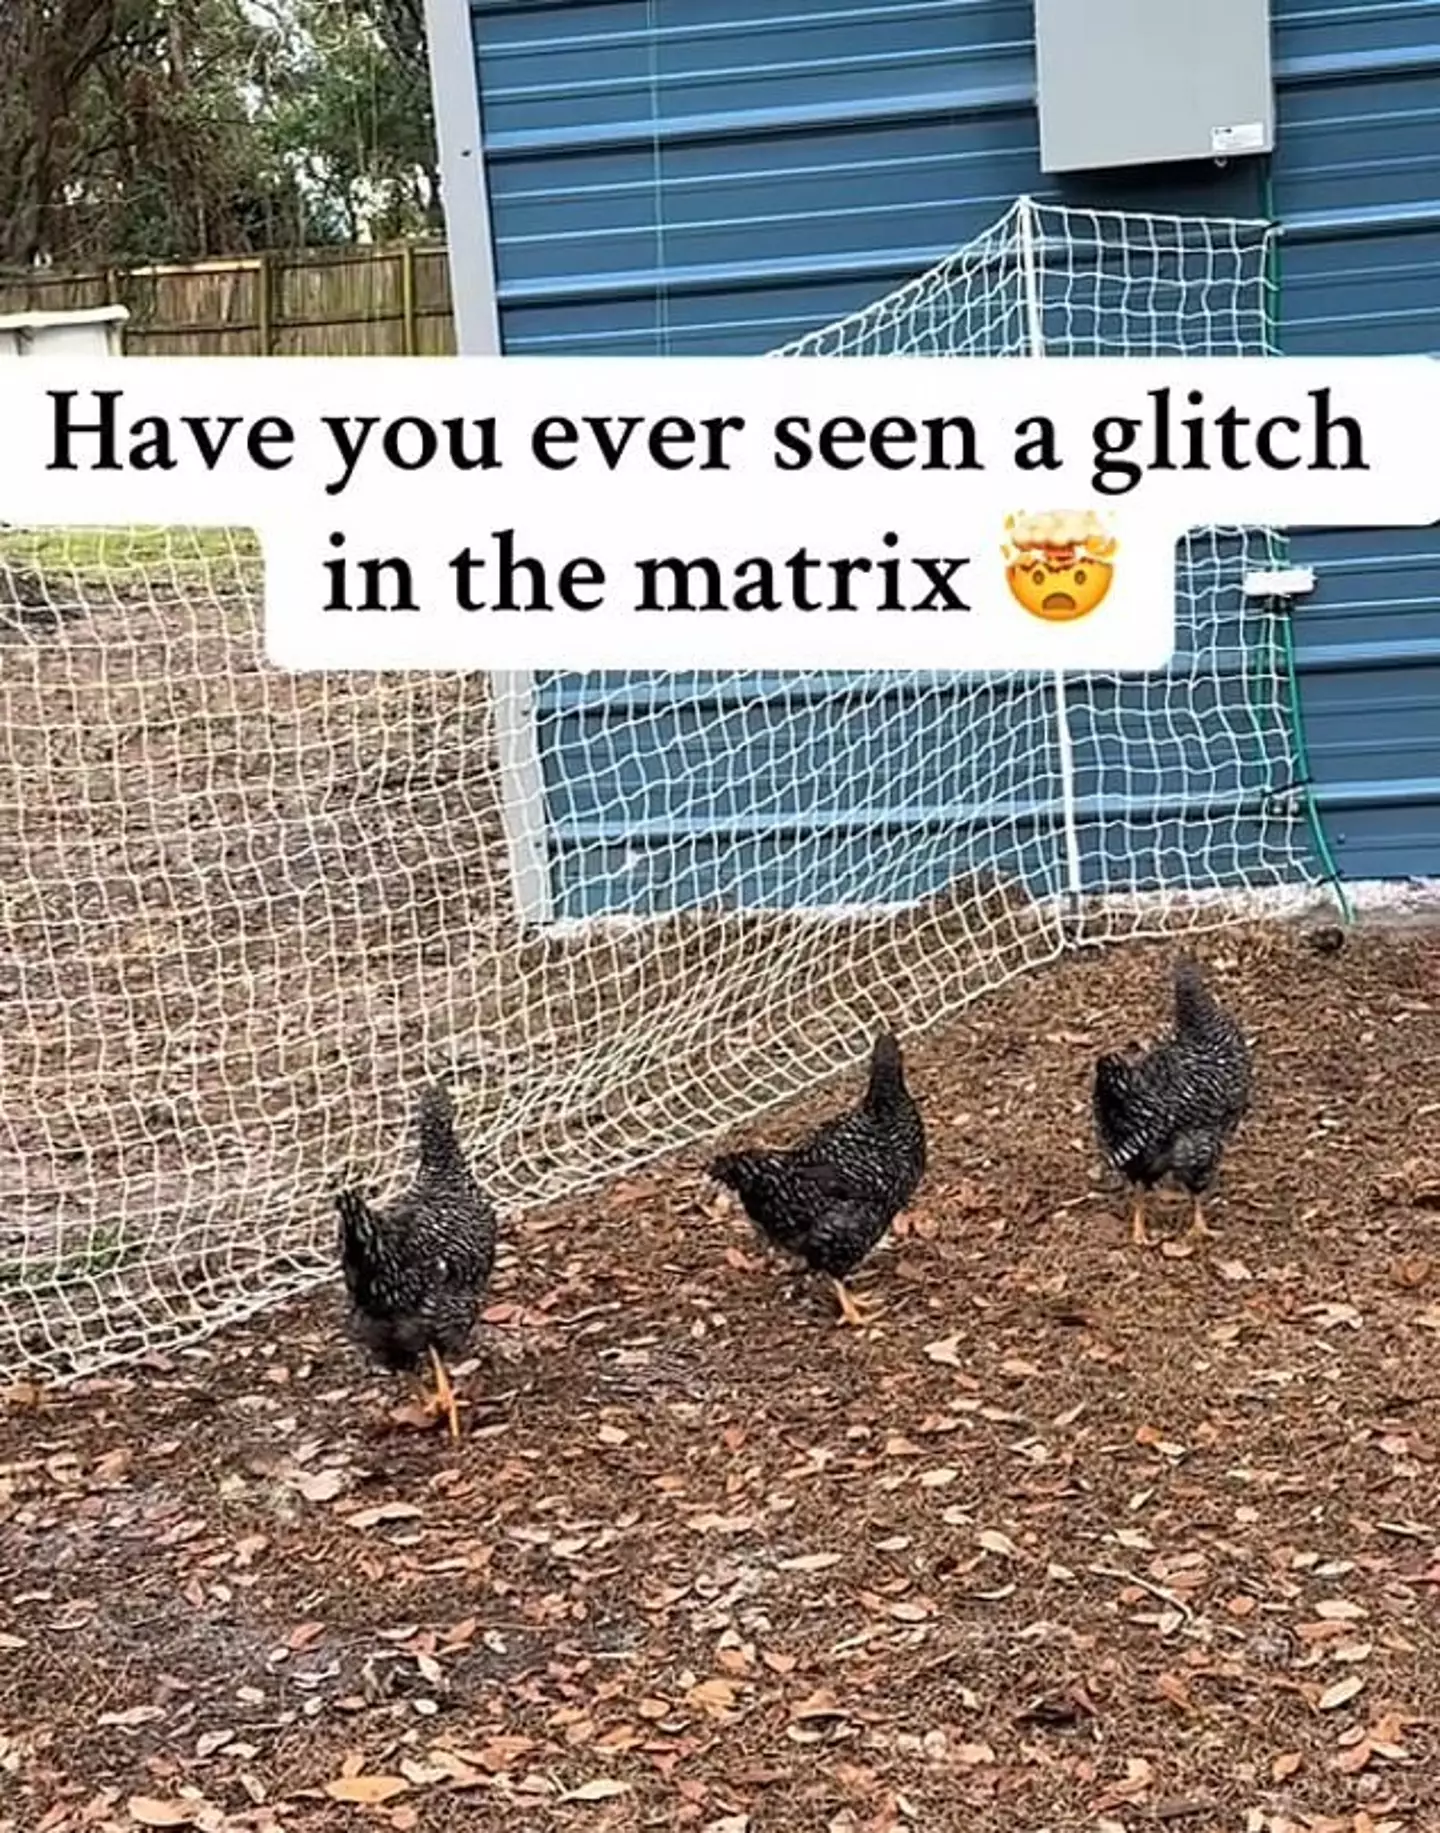 A bizarre video of chickens suddenly freezing has got people calling it a 'chick in the matrix'.